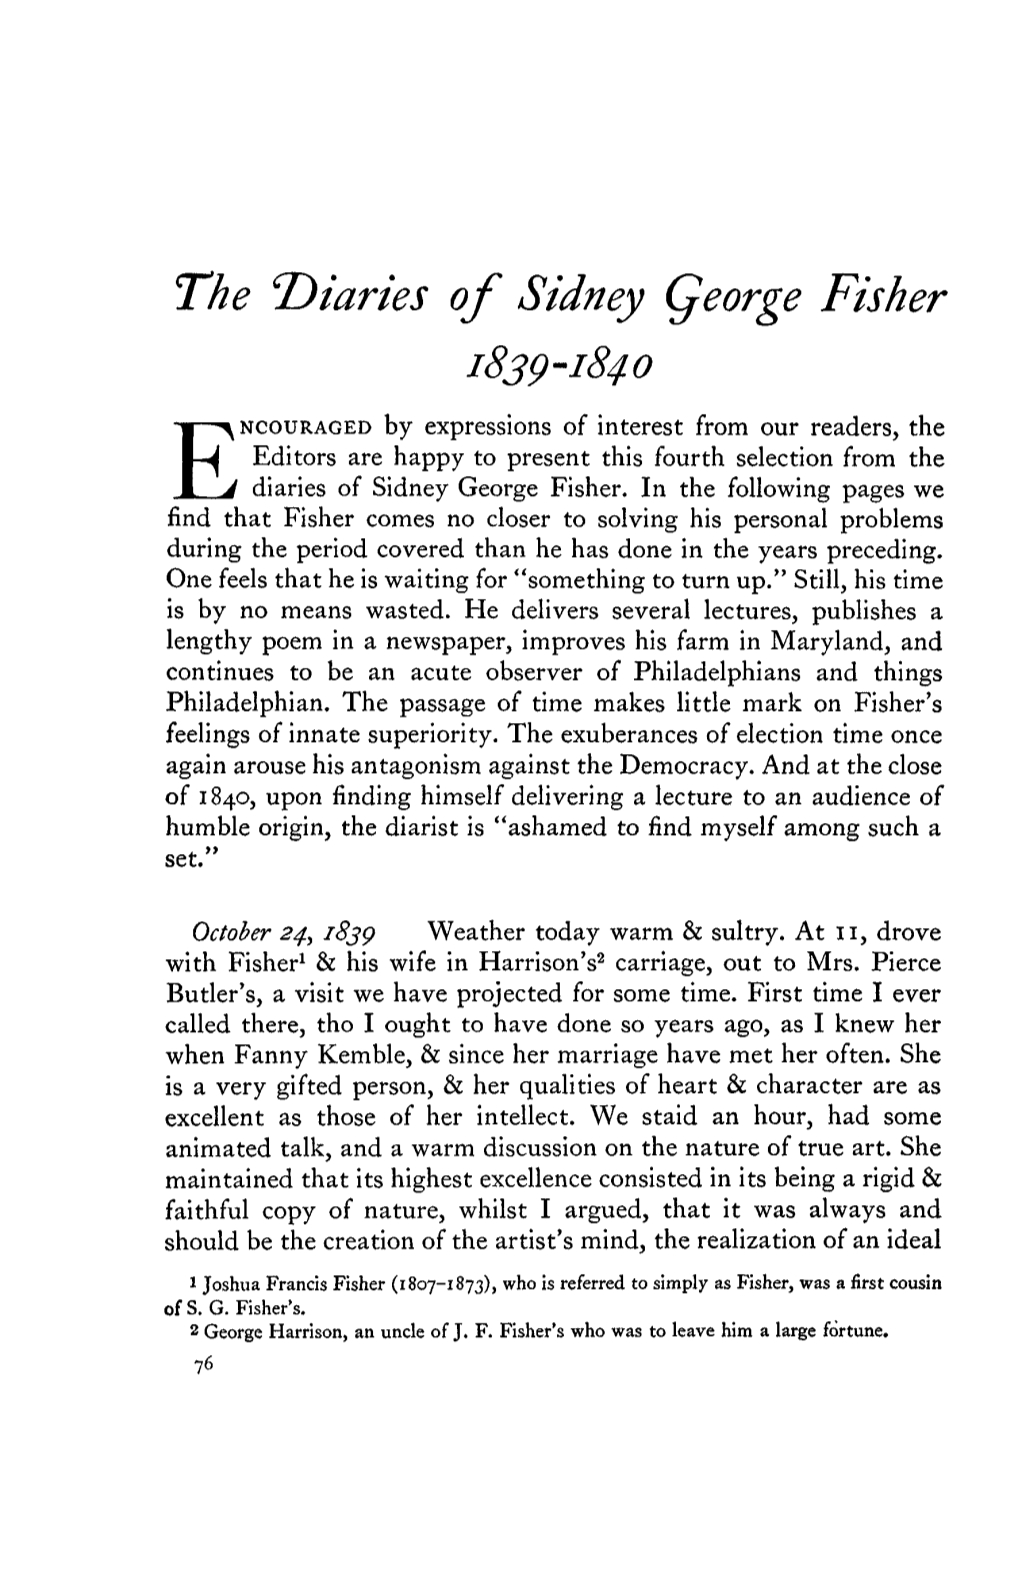 The 'Diaries of Sidney Qeorge Fisher 1839-1840